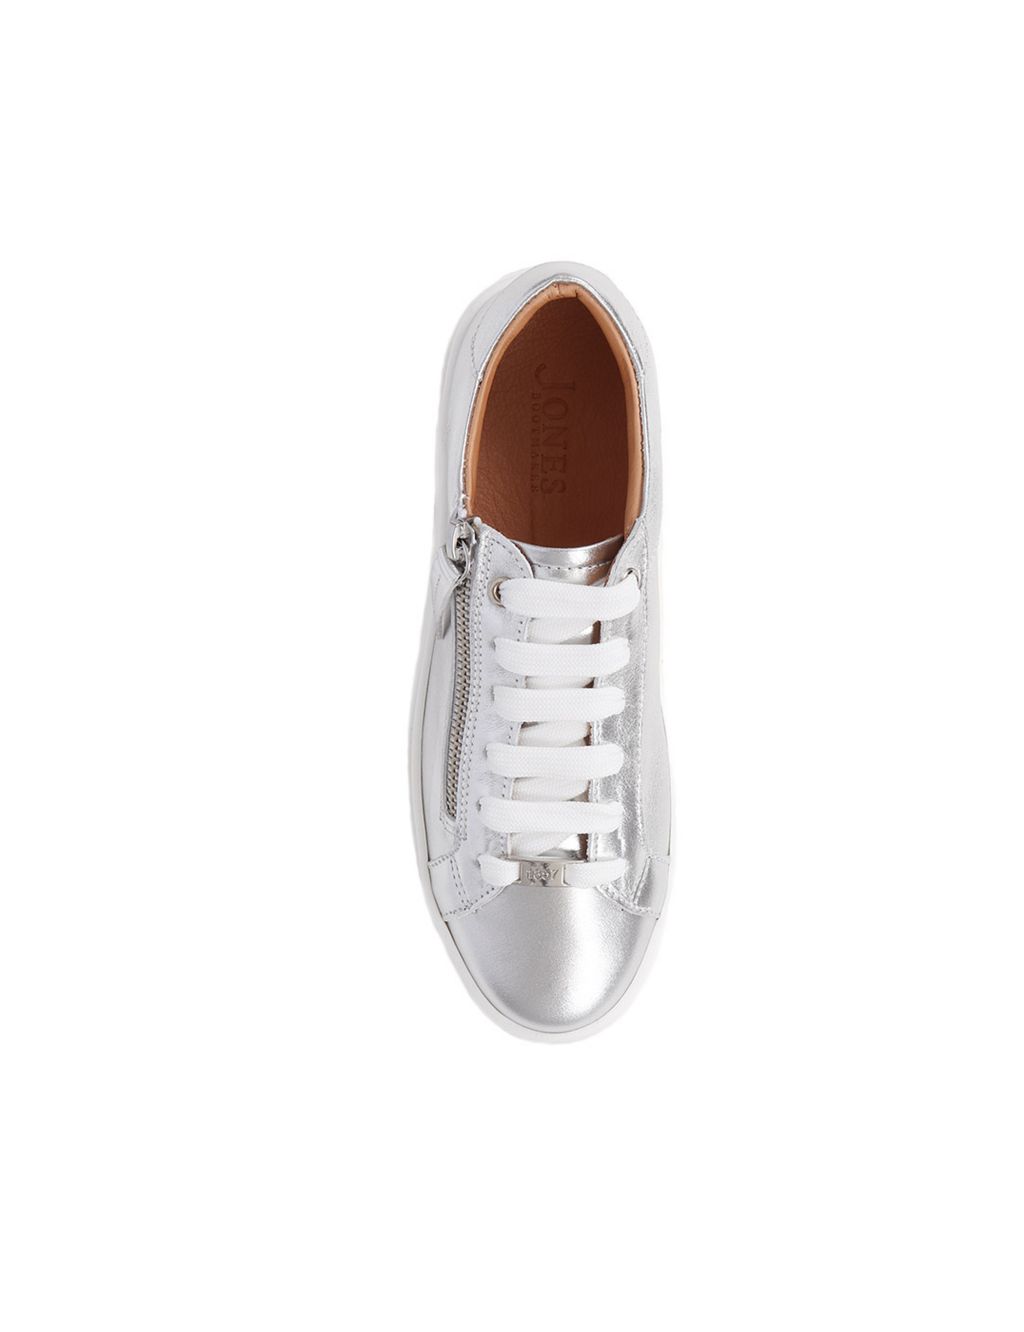 Leather Lace Up Flatform Trainers image 6